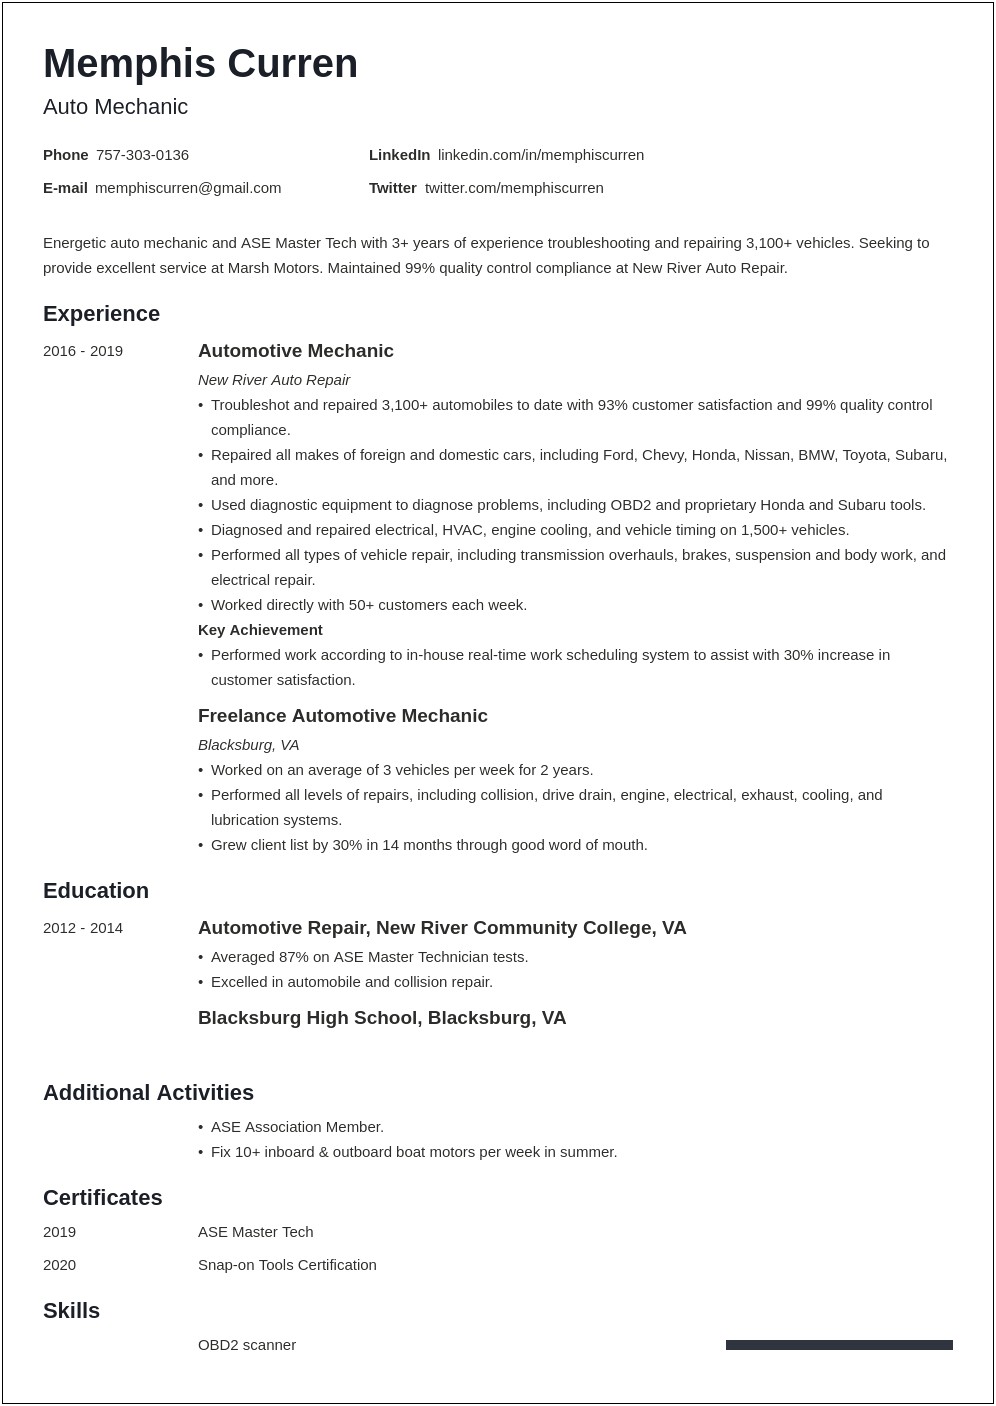 Resume Format For Automotive Service Manager